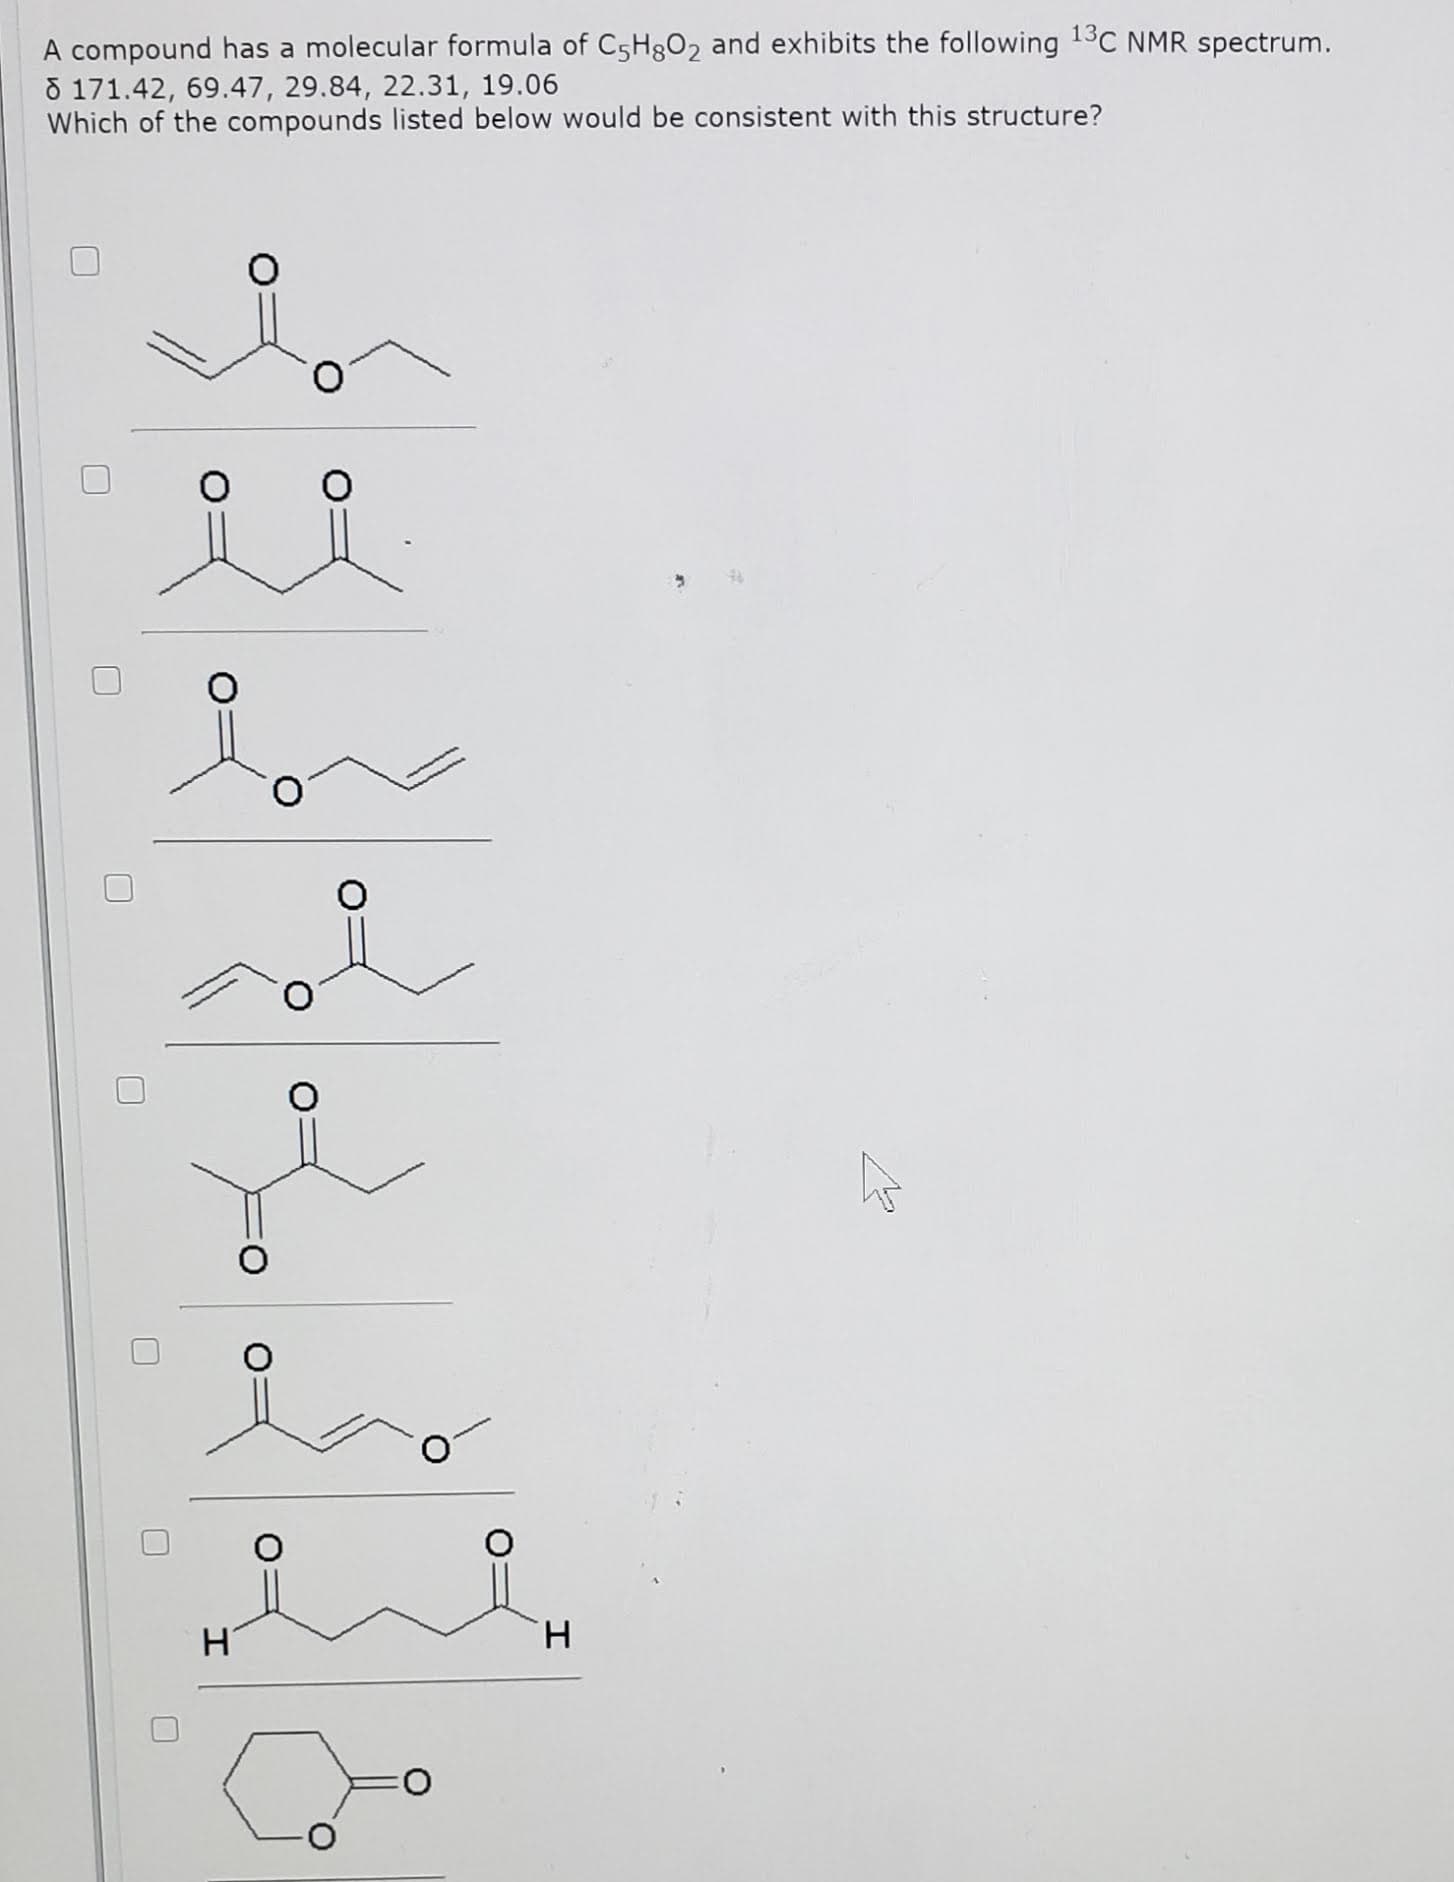 A compound has a molecular formula of C5H802 and exhibits the following 13C NMR spectrum.
8 171.42, 69.47, 29.84, 22.31, 19.06
Which of the compounds listed below would be consistent with this structure?
